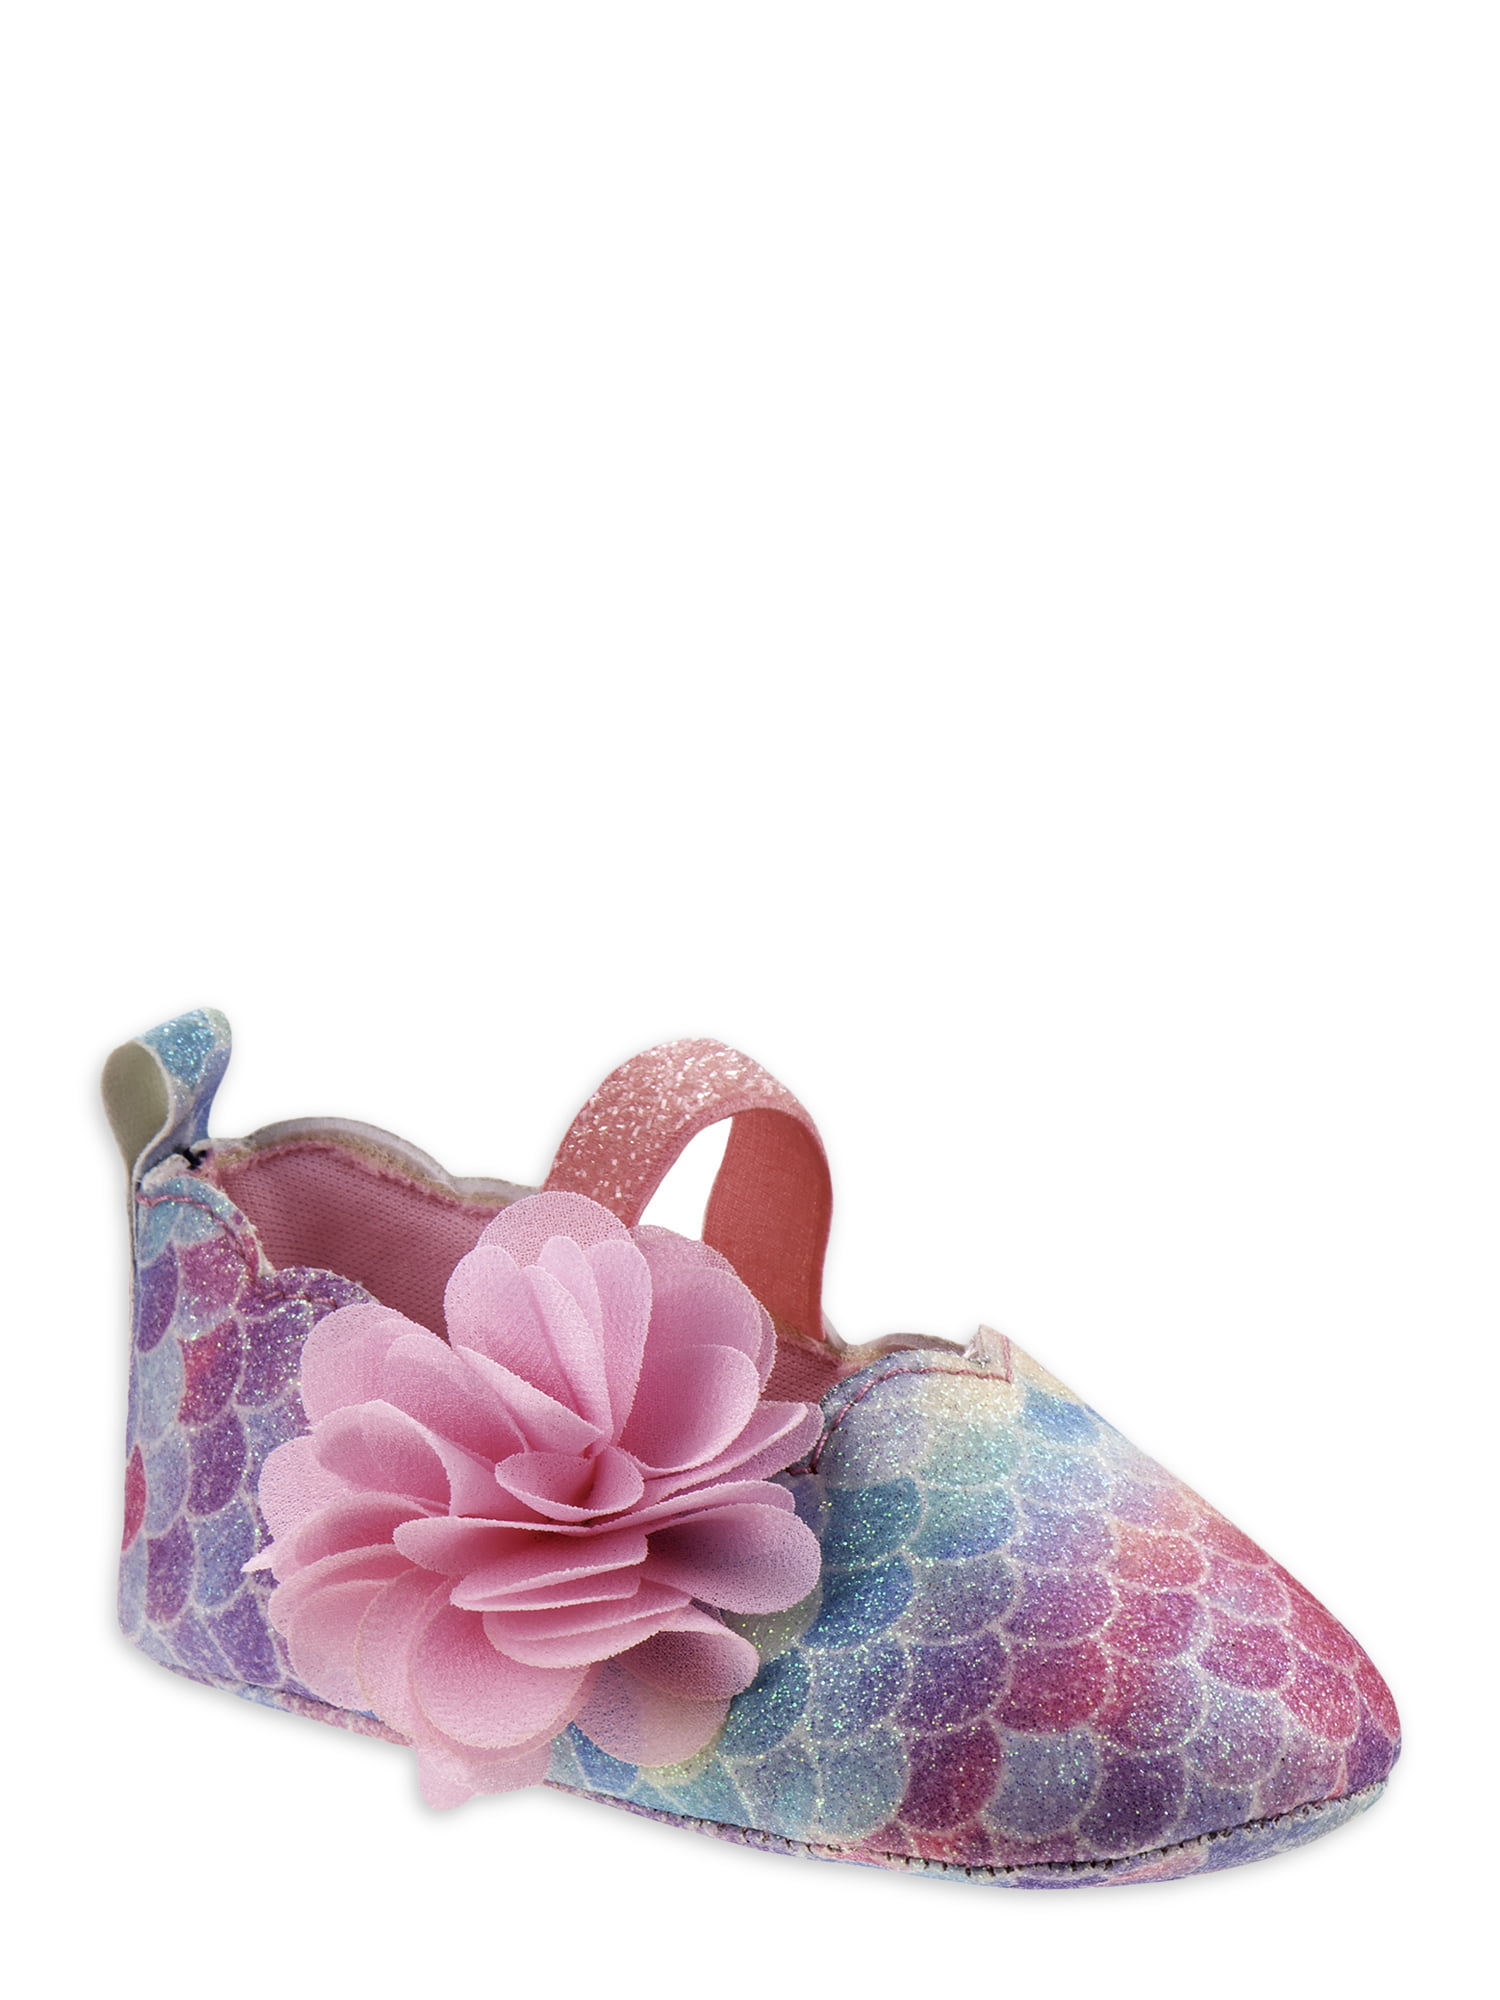 laura ashley shoes for toddlers